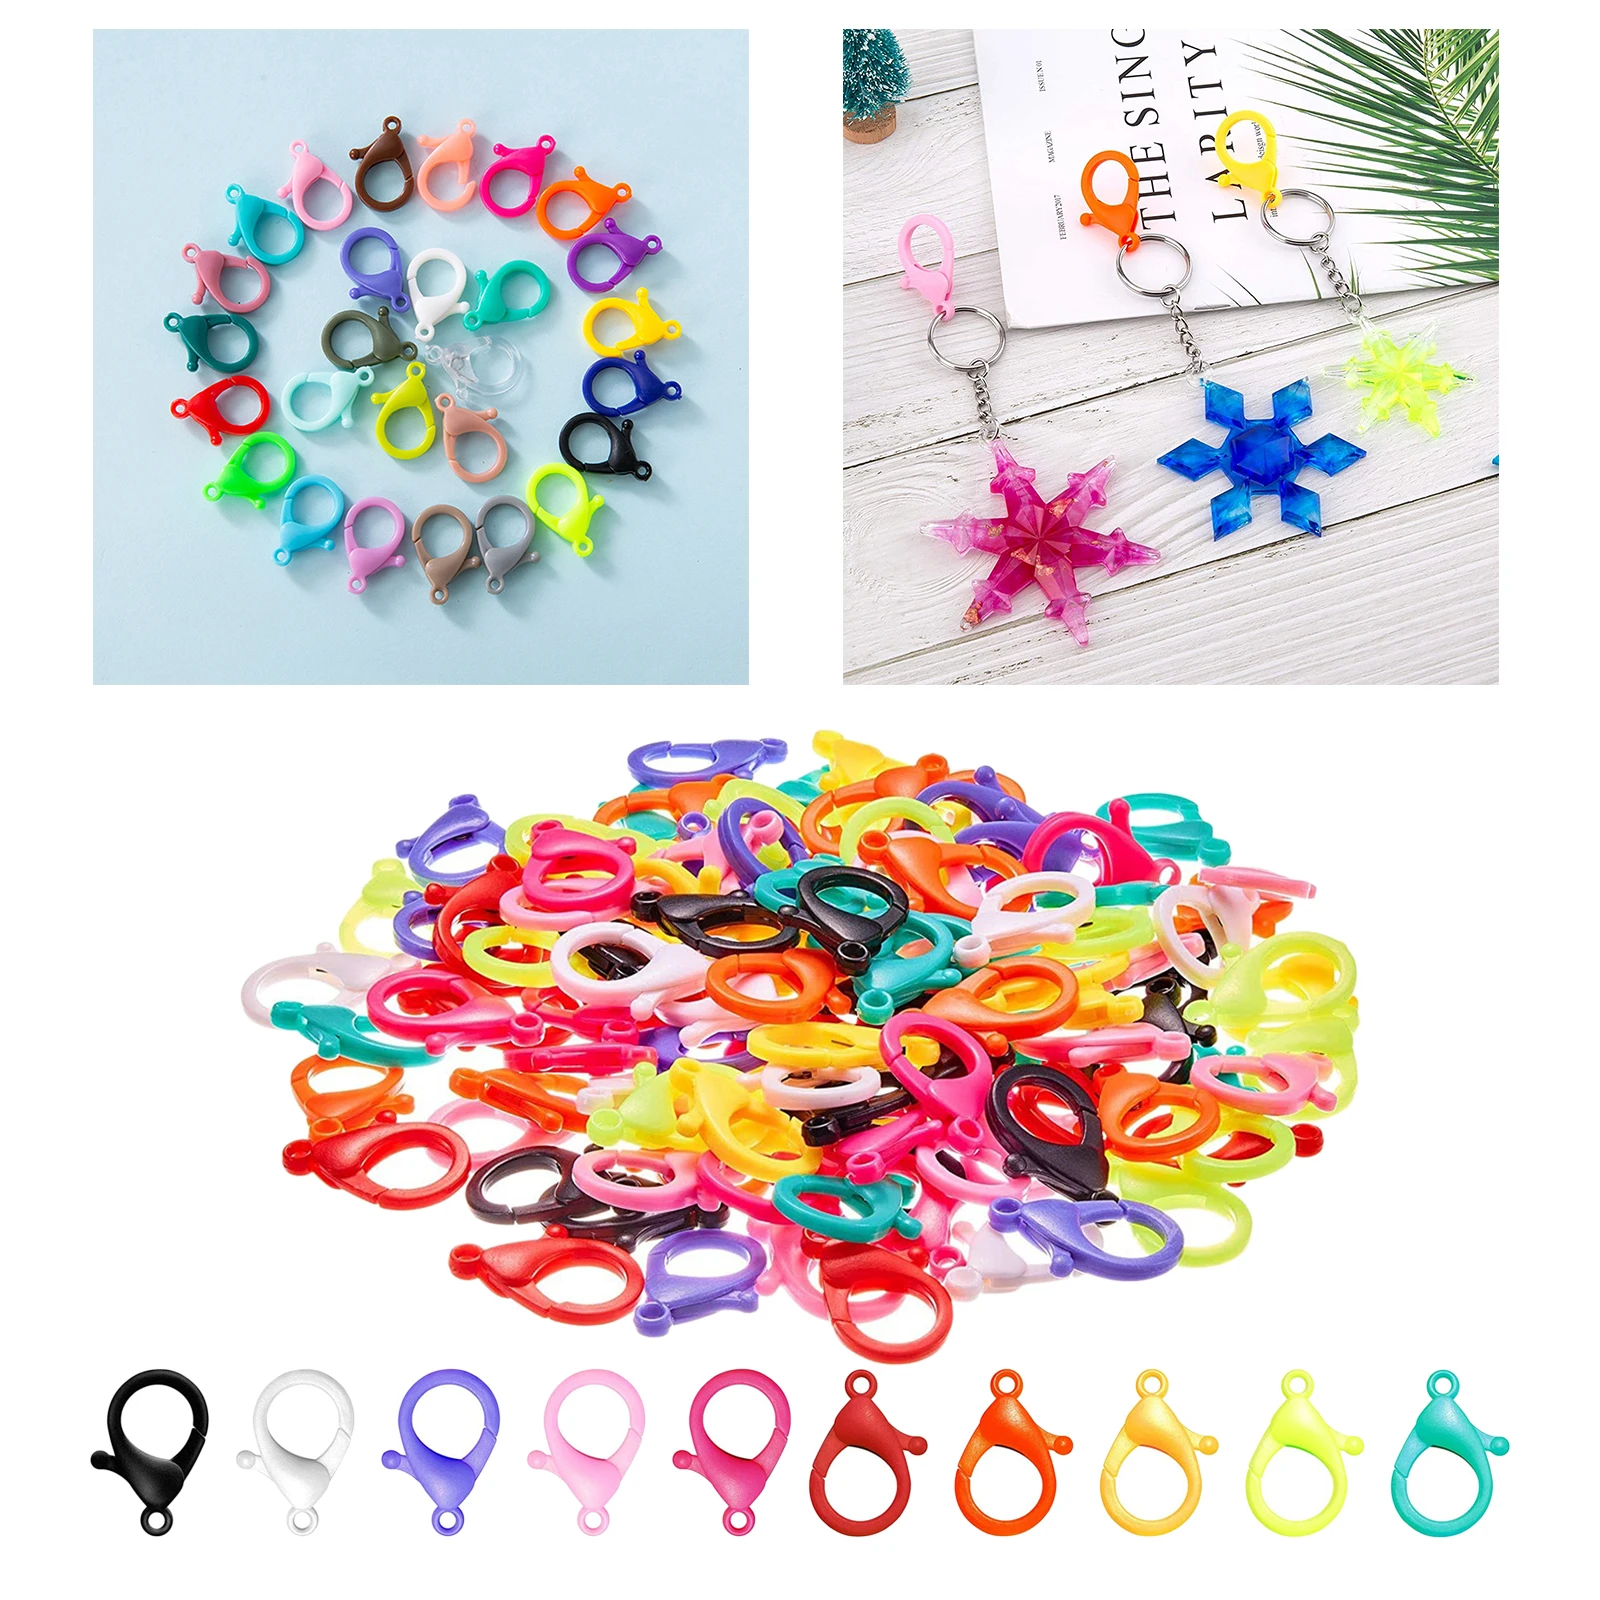 100Pcs Colorful Plastic Snap Lobster Clasp Hooks DIY Jewelry Making Findings for Keychain Rings Toys Bags Purse Accessories